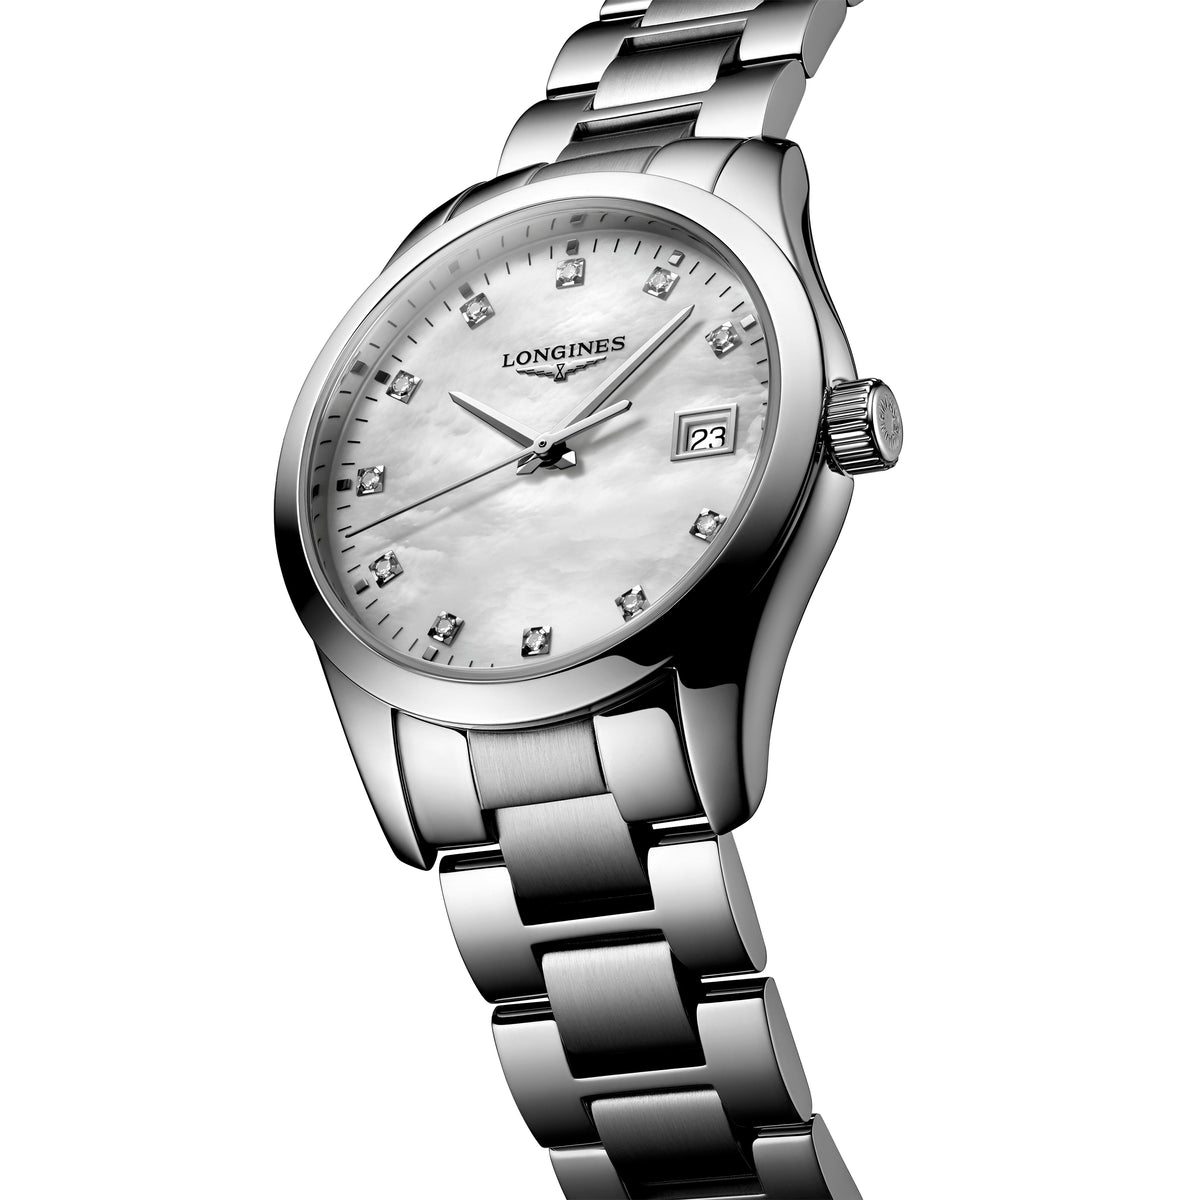 Conquest Classic Mother-of-Pearl Watch | Longines | Fink's